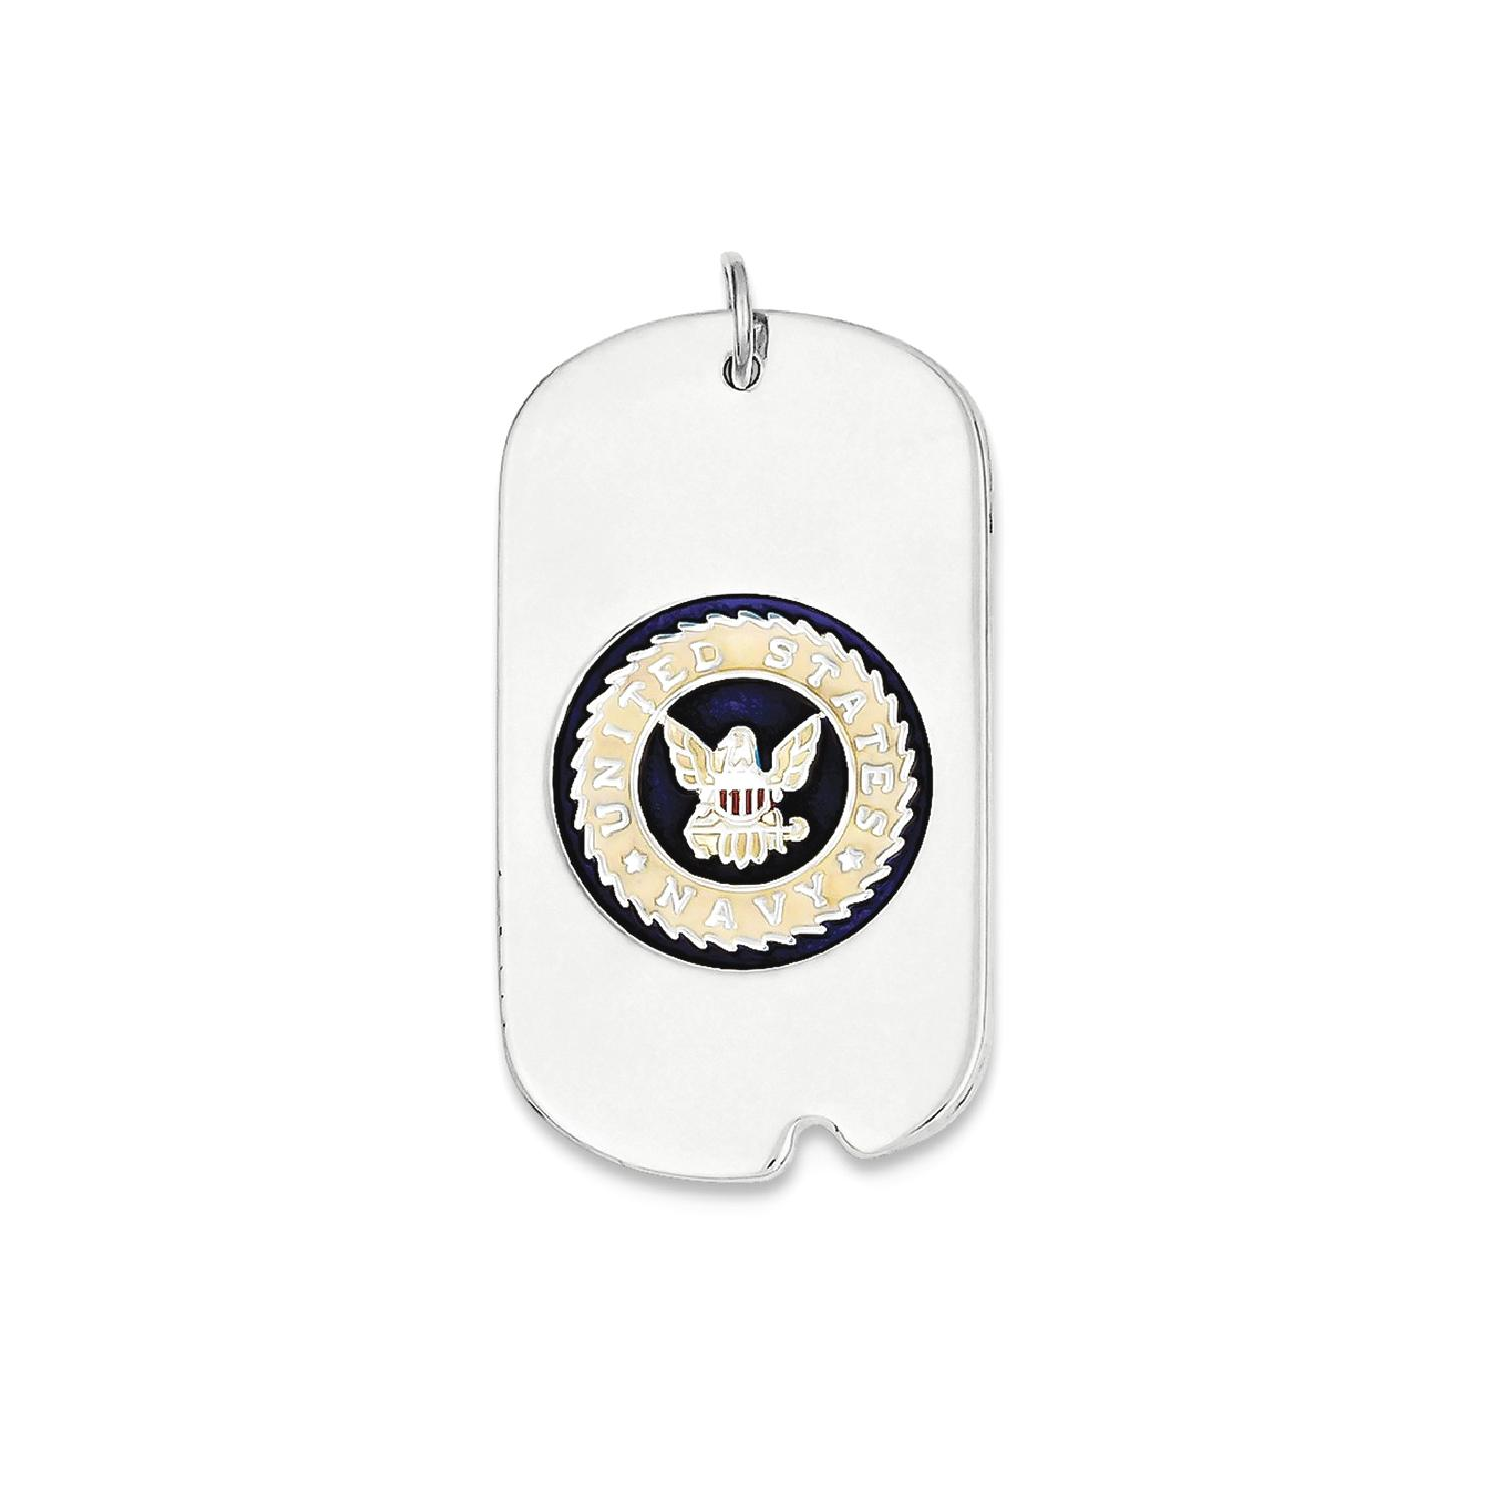 IceCarats 925 Sterling Silver Rhod Plated Us Navy Dog Tag Military